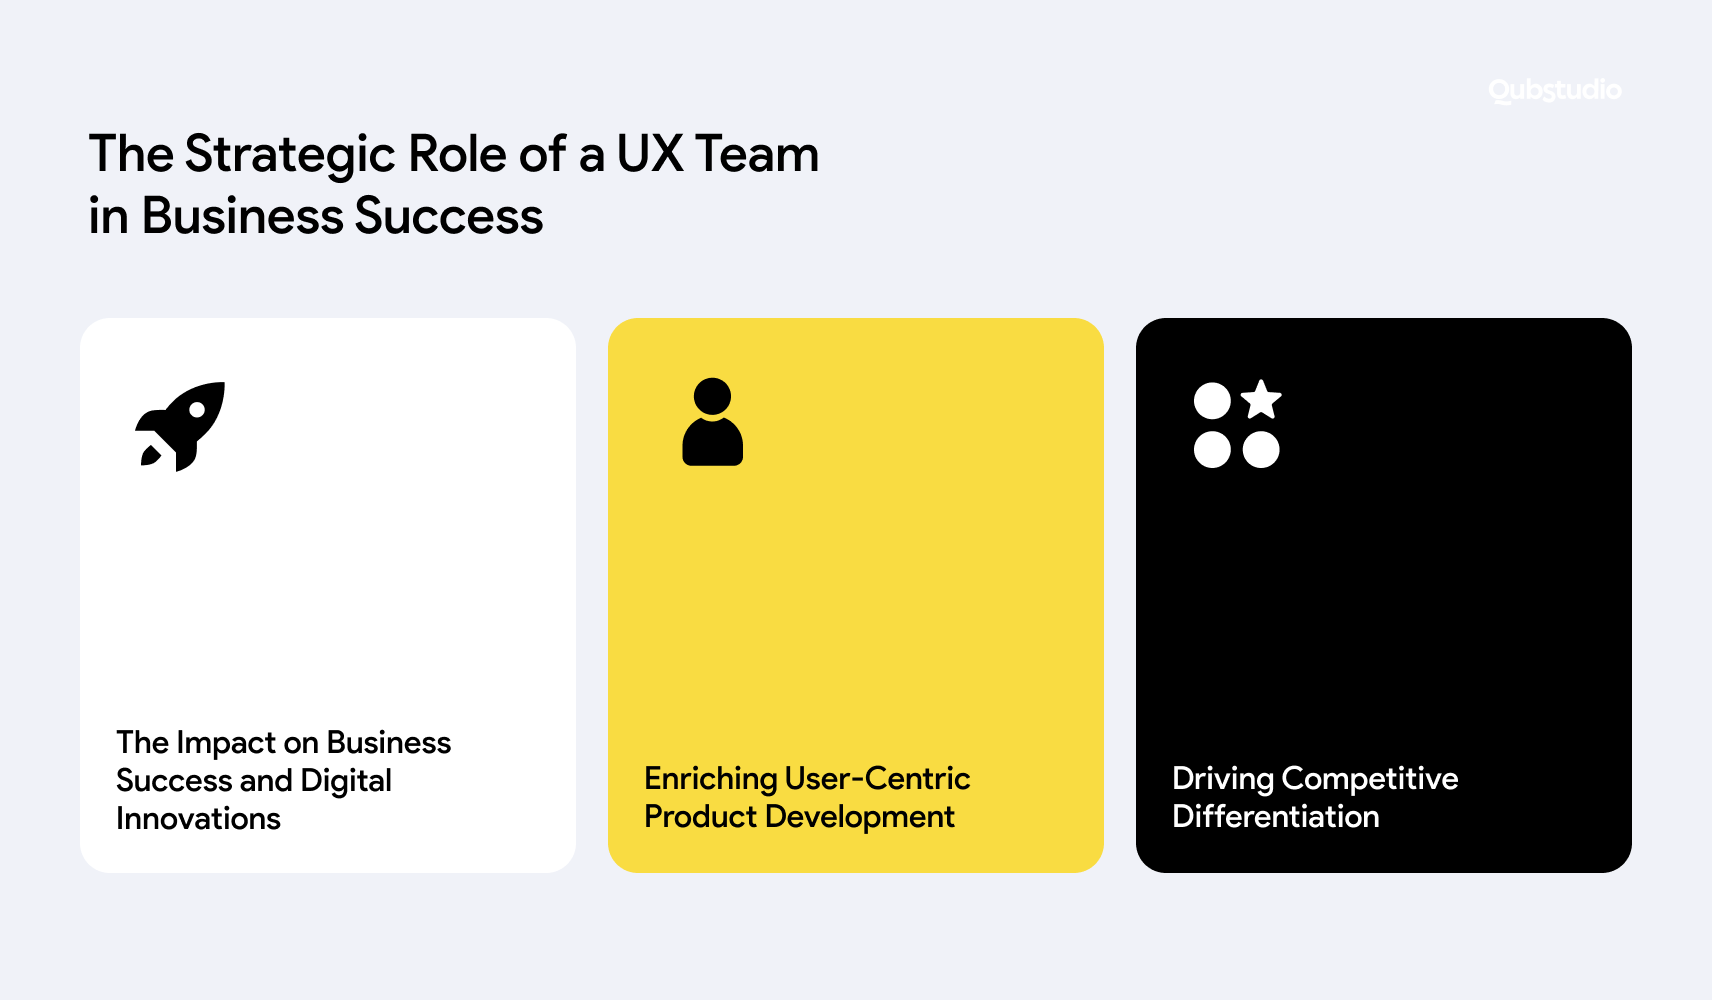 Visual representation highlighting the strategic importance of the UX team for driving business success through user-centered design and customer satisfaction initiatives